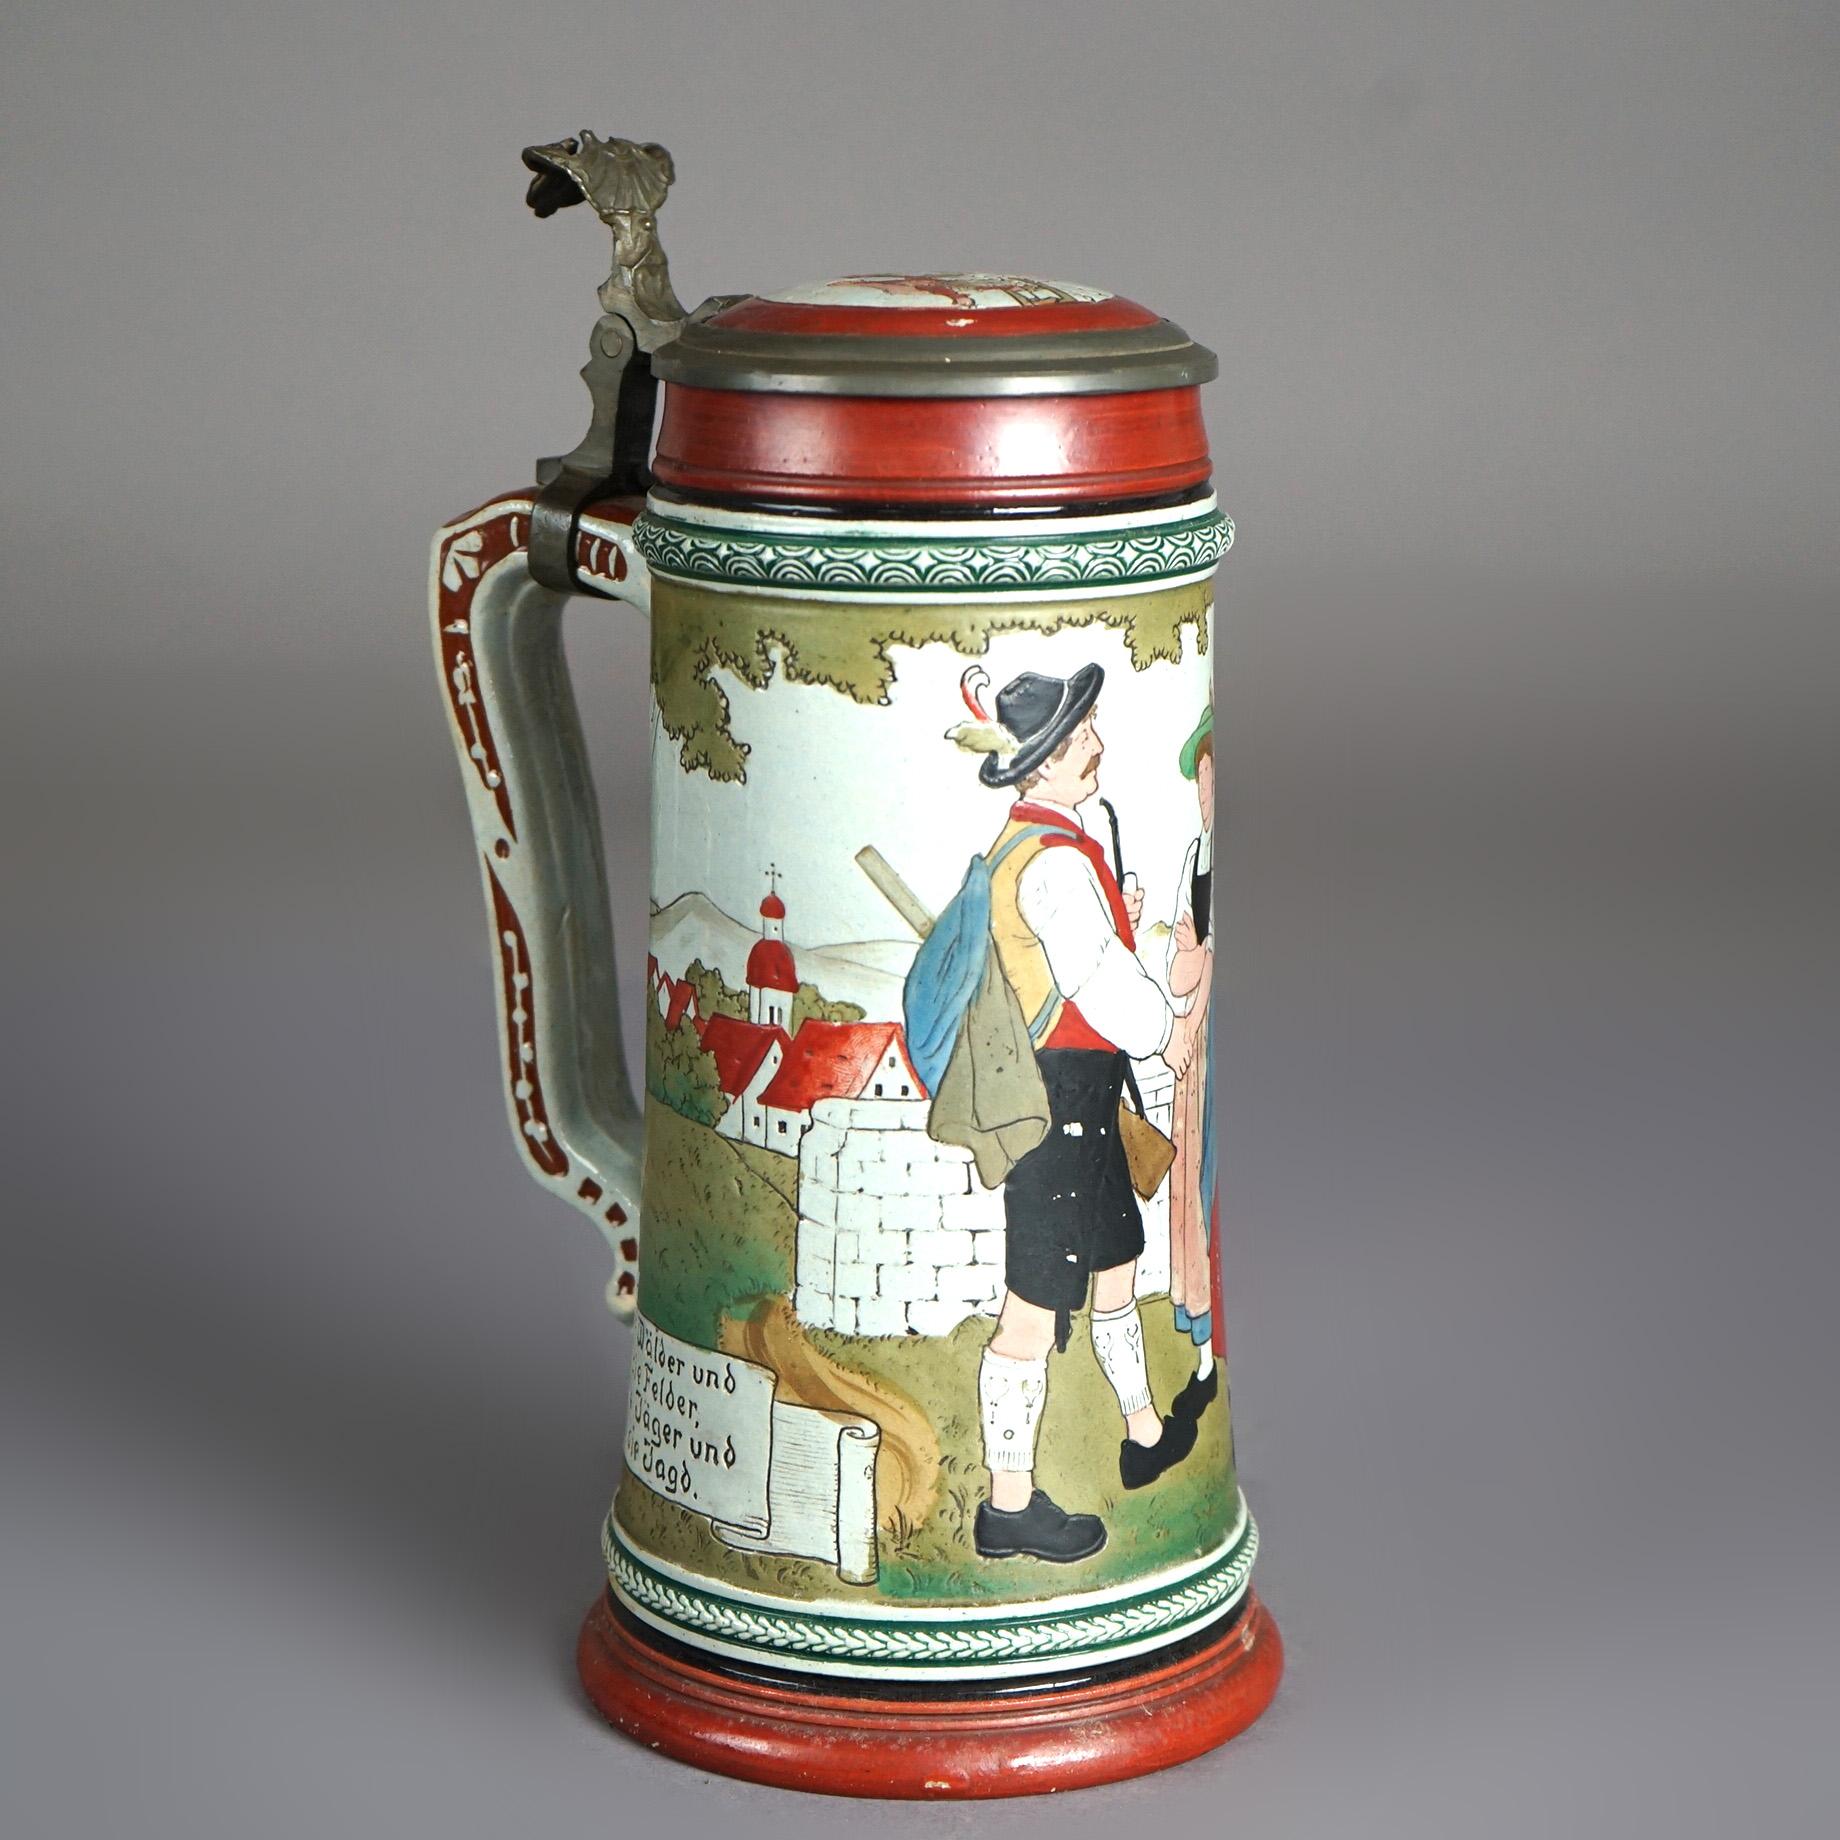 Antique Art & Crafts Scenic Musterschutz Germany Pottery Stein Circa 1900 For Sale 1